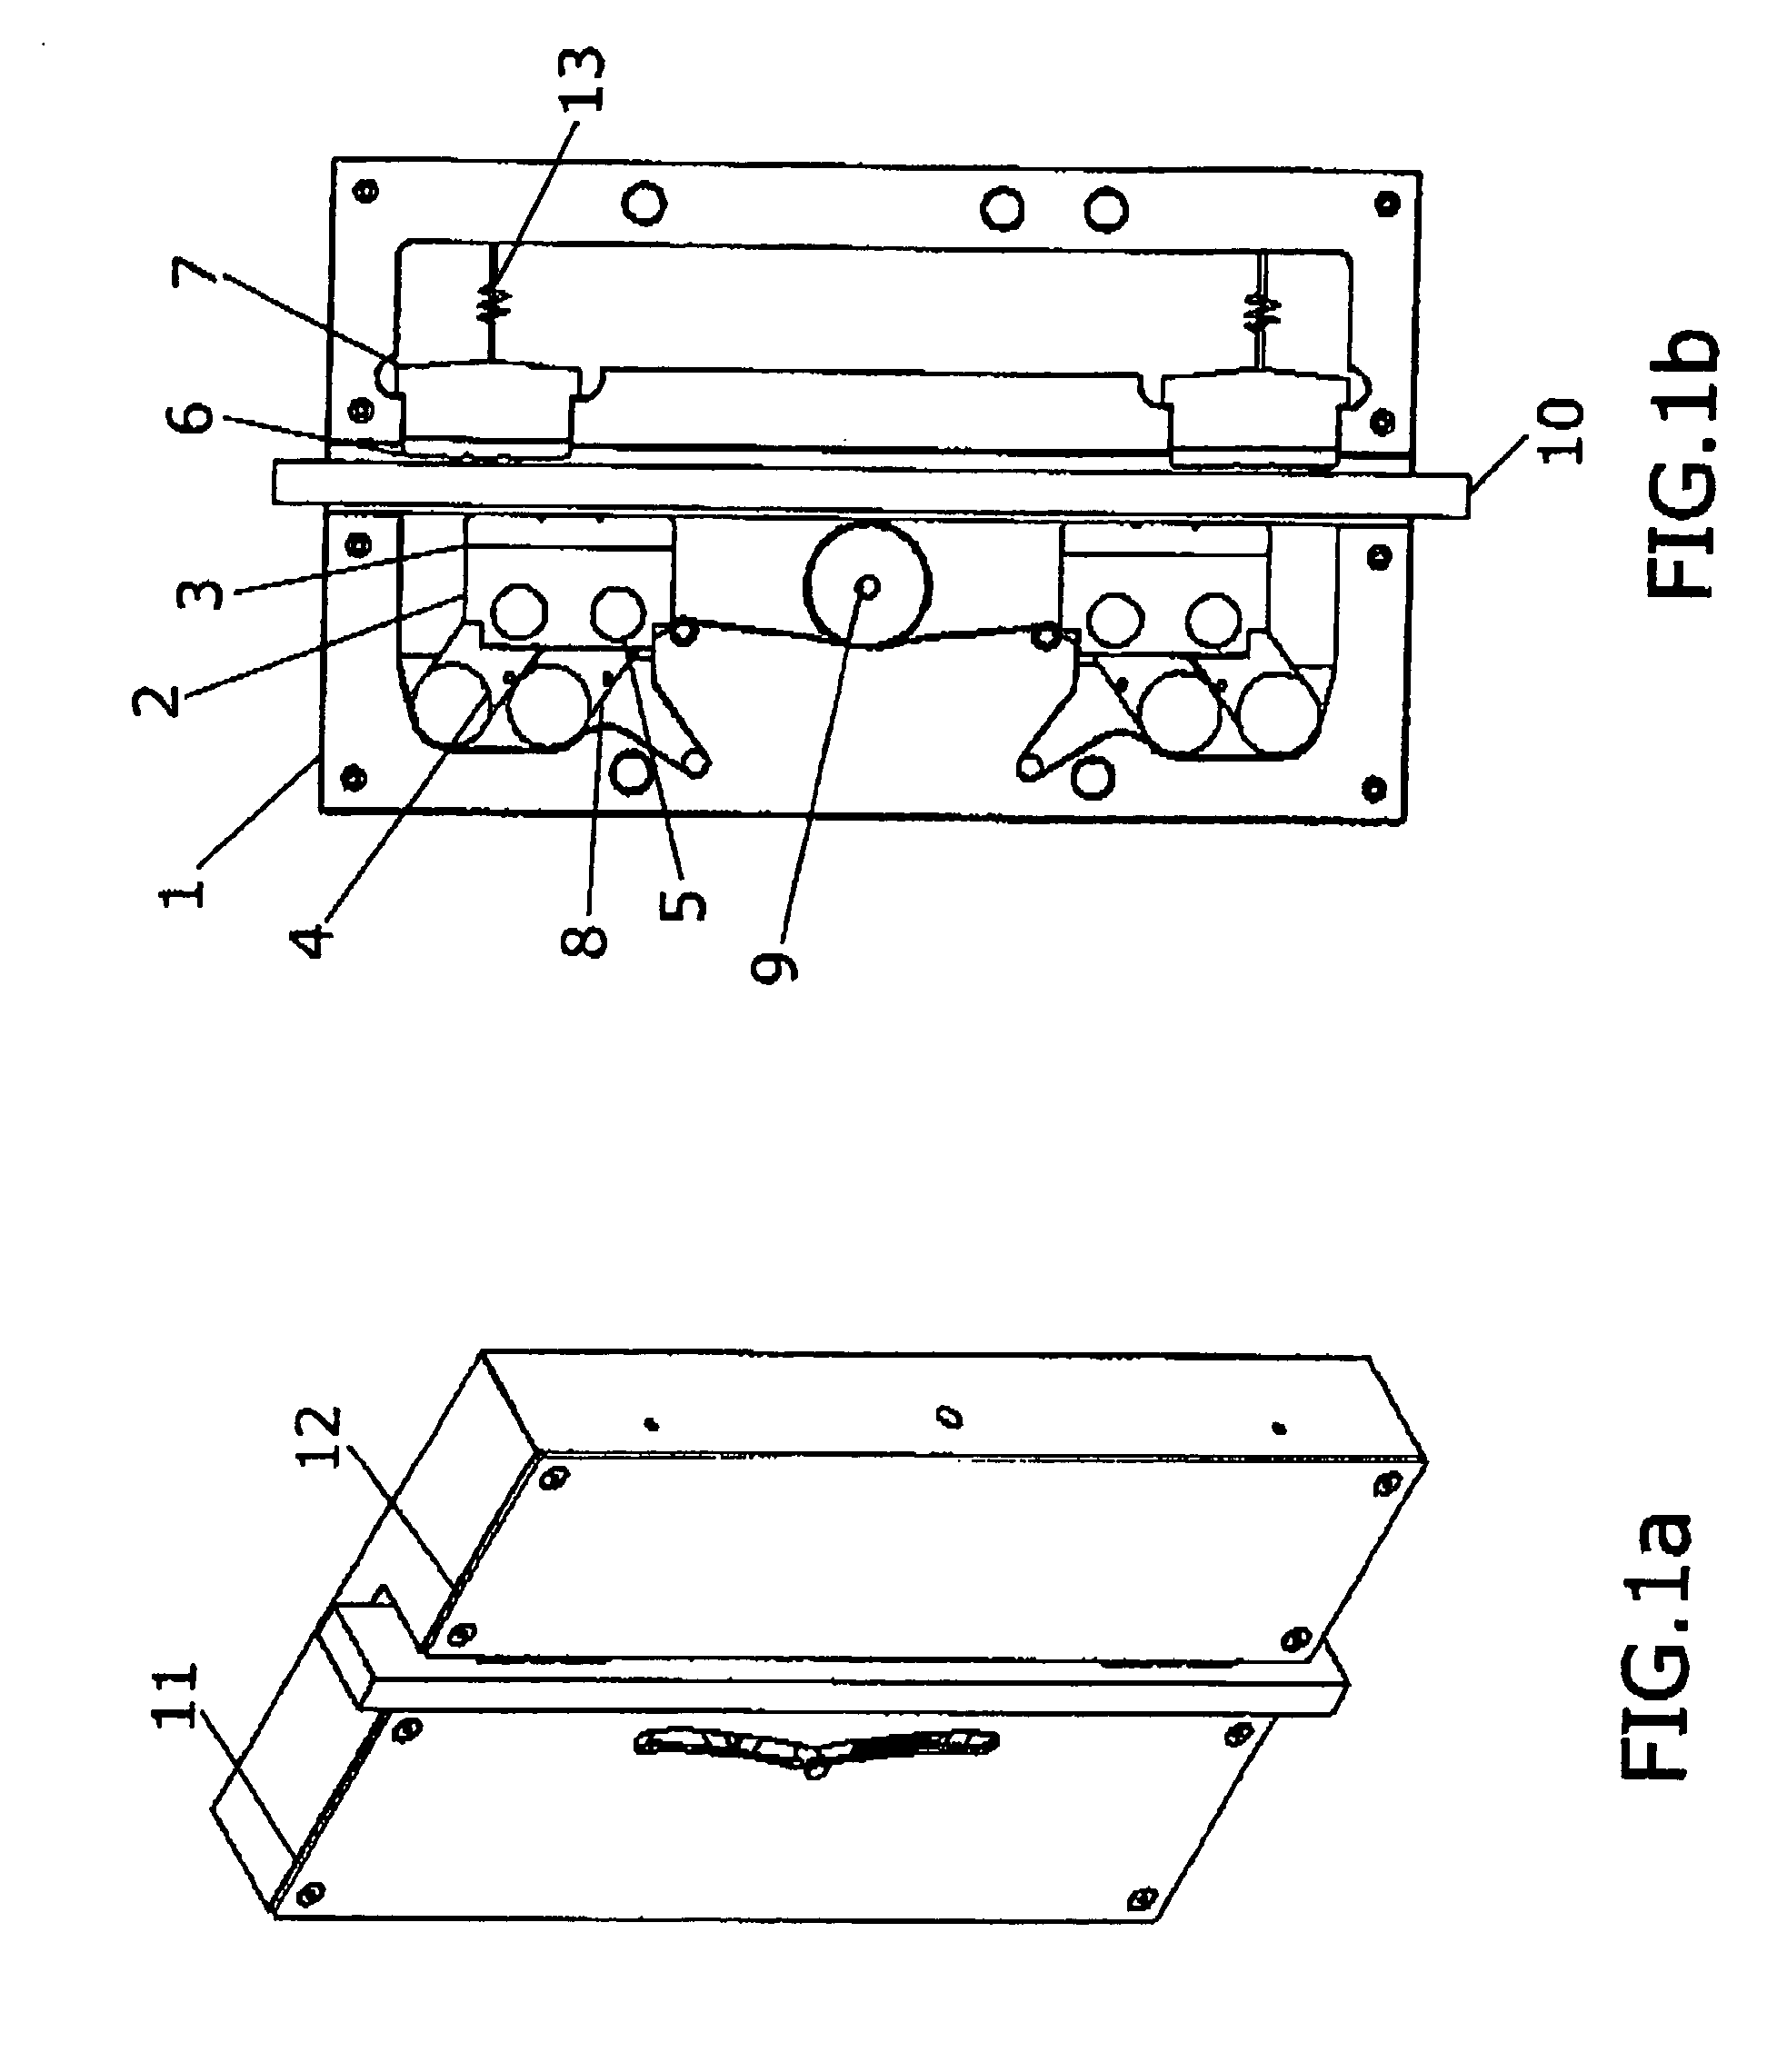 Gradual catch system for a bidirectional safety device